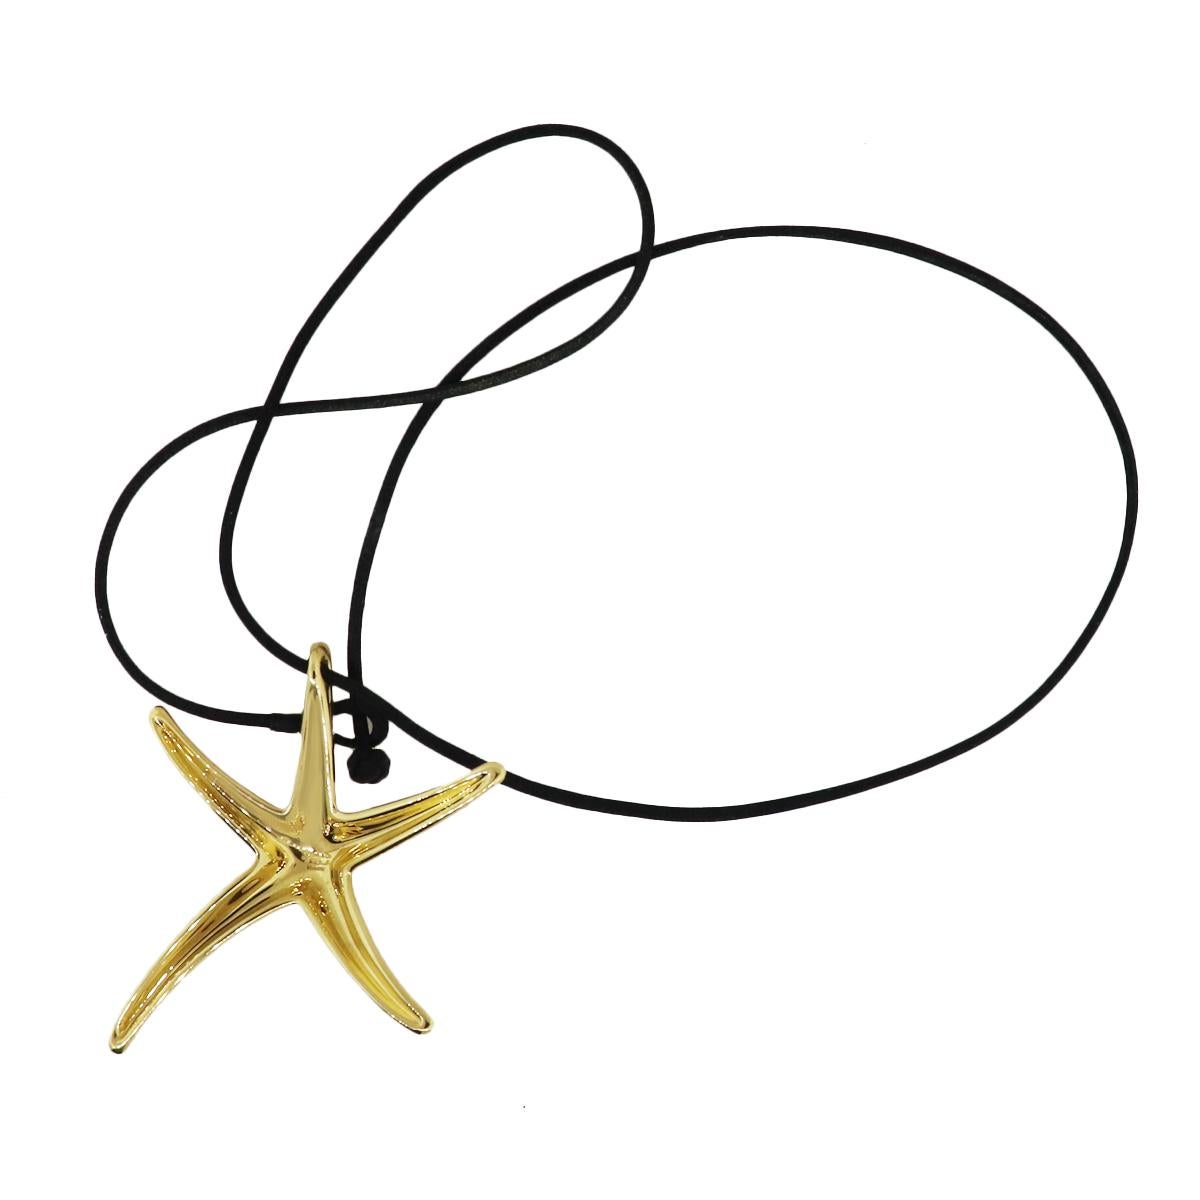 Material: 18k yellow gold
Necklace Measurements: Black silk cord necklace measuring 18″ in length
Pendant Measurements: 1.70″ x 0.29″ x 1.90″
Total Weight: 10g (6.5dwt)
SKU: G8783